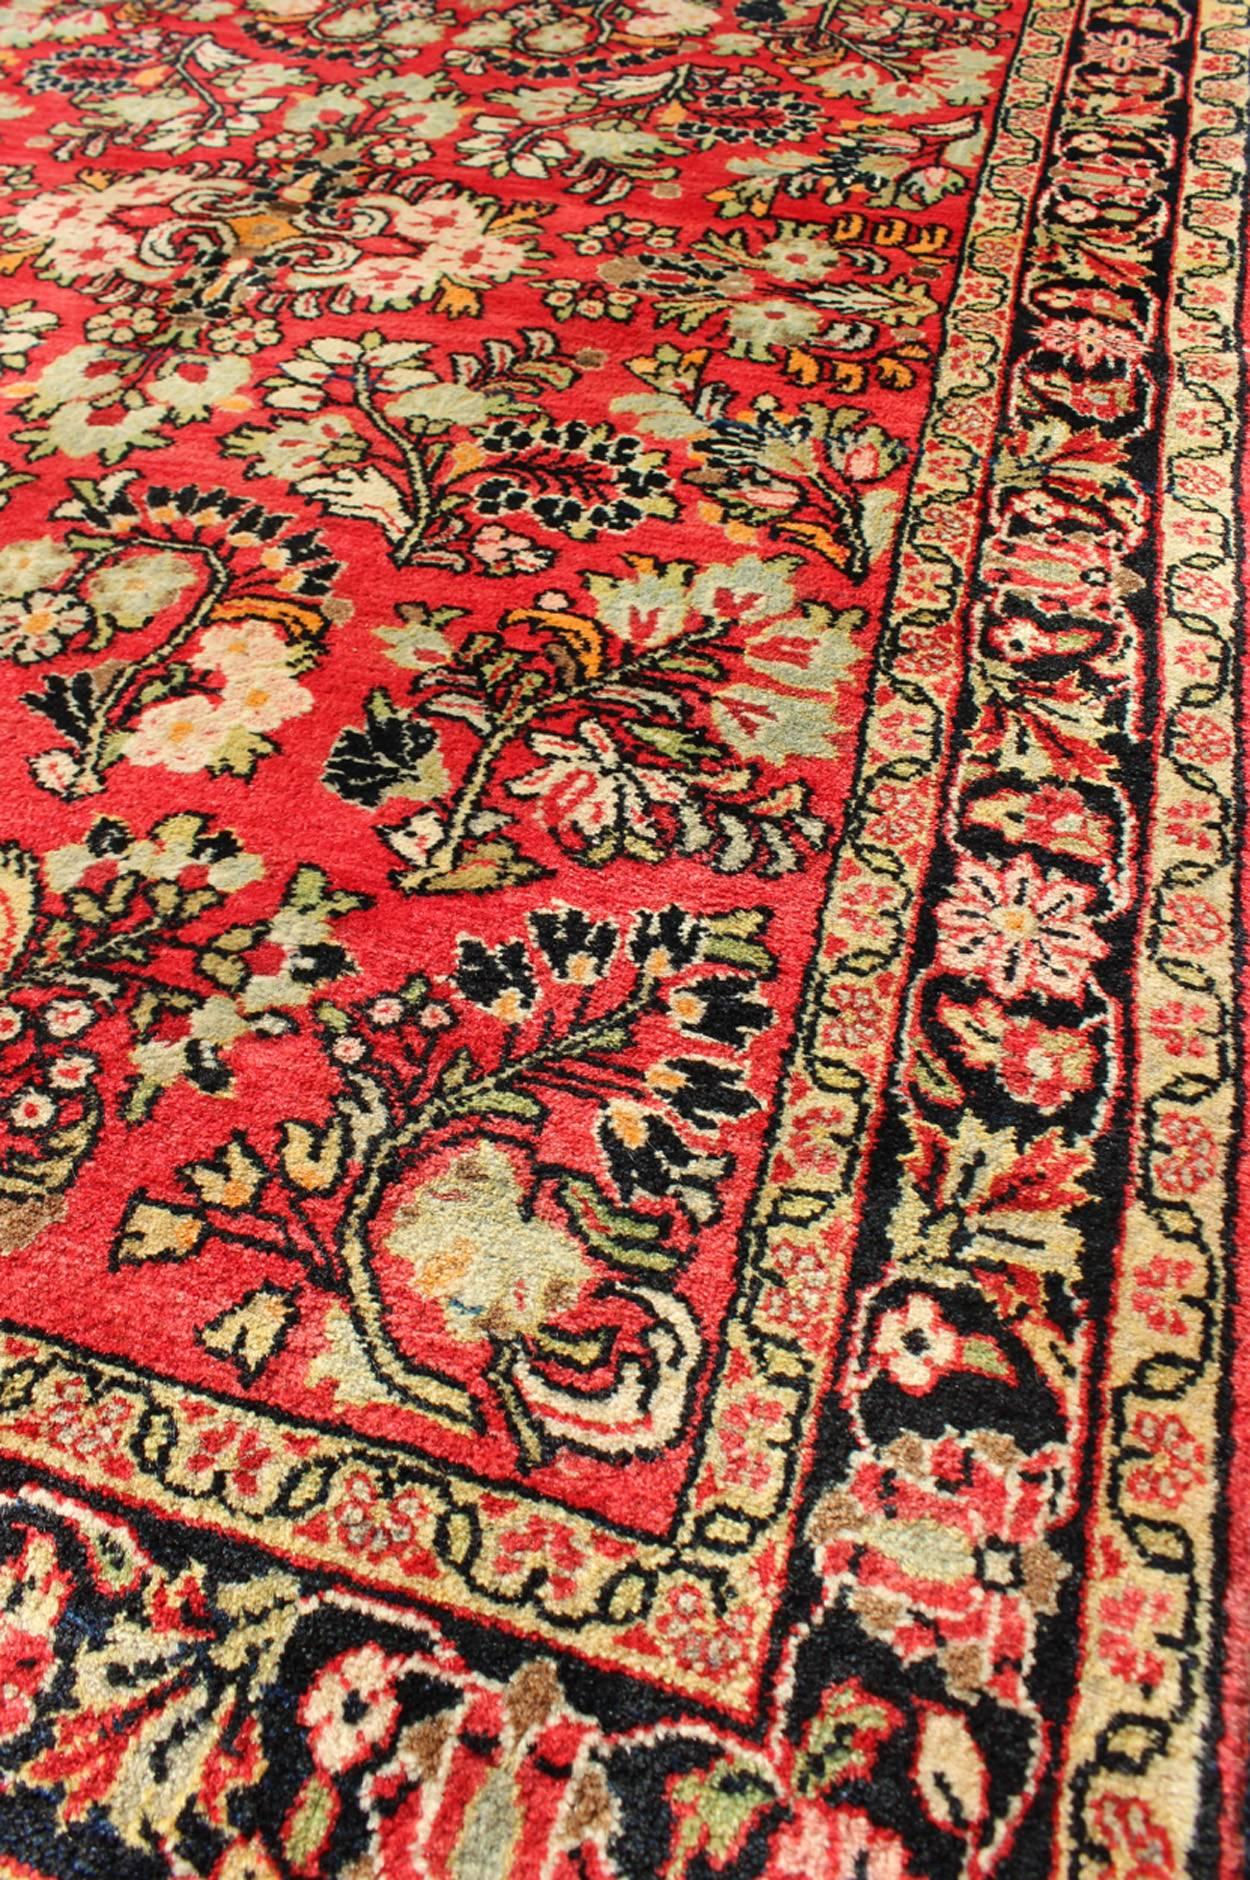 Vintage Persian Sarouk Rug with All-Over Floral Design in Rich Red, Onyx Black In Excellent Condition For Sale In Atlanta, GA